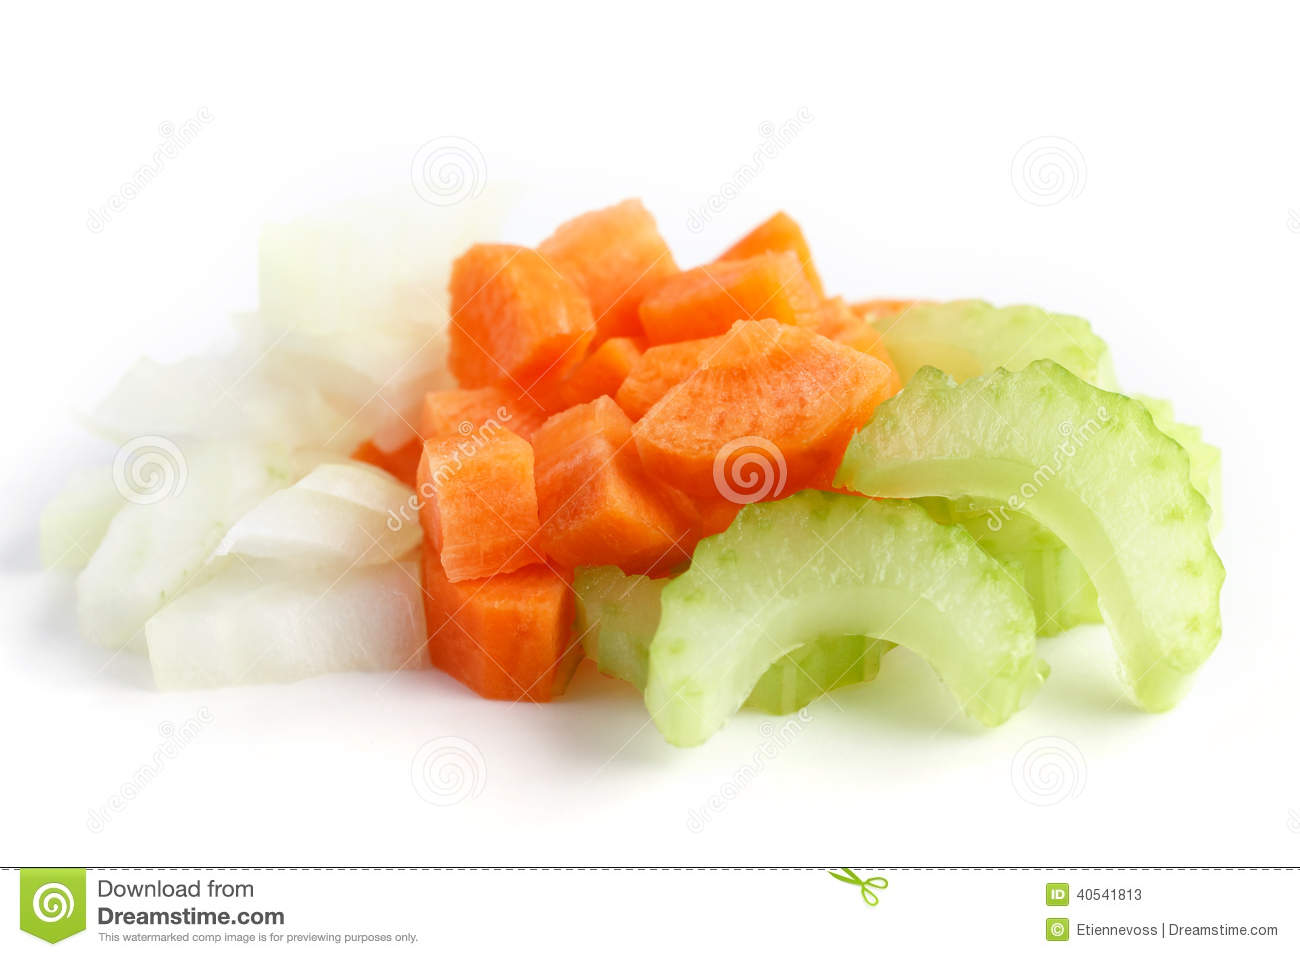 Classic Mix Of Carrots Celery And Onion All Chopped Up And Ready To